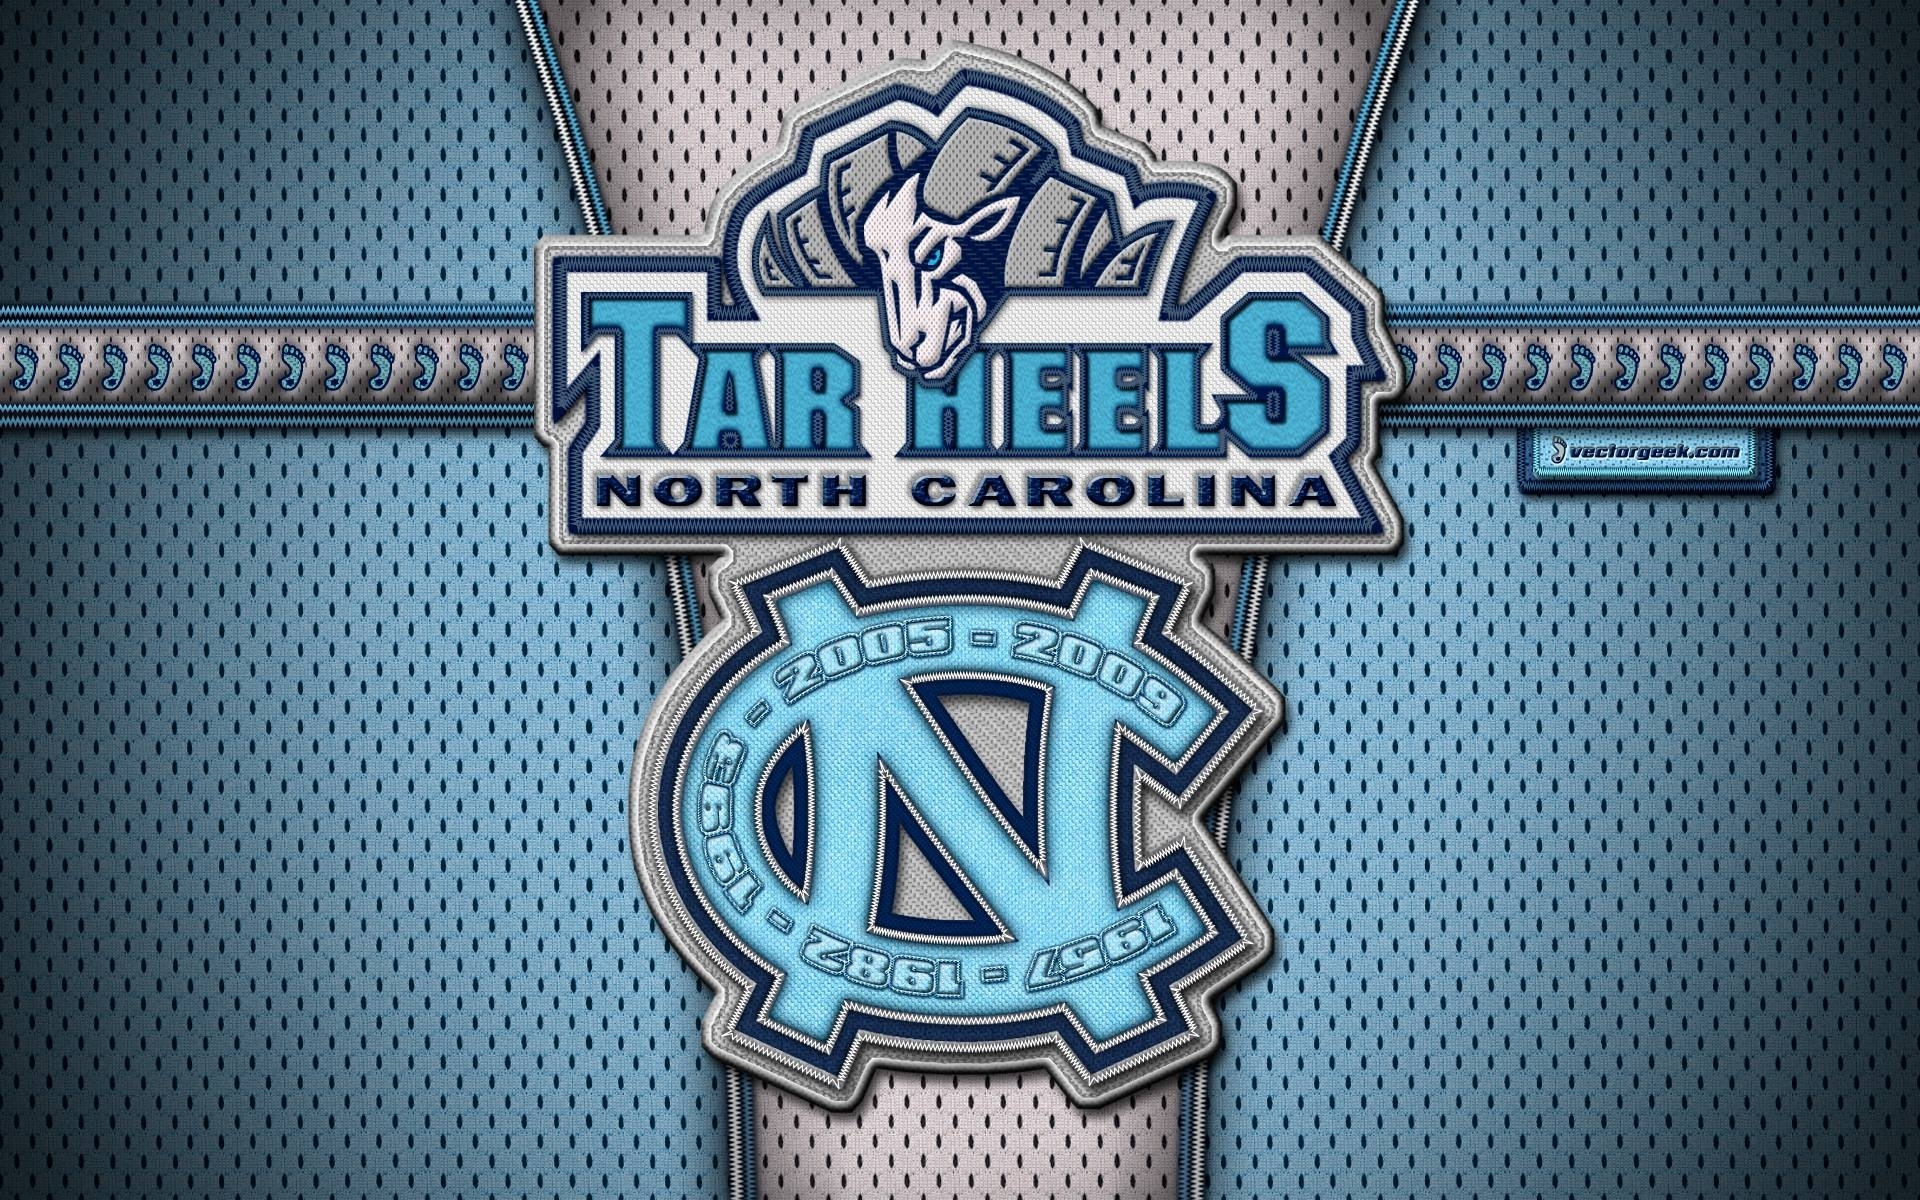 10 New North Carolina Tar Heels Wallpapers FULL HD 1920×1080 For PC Background